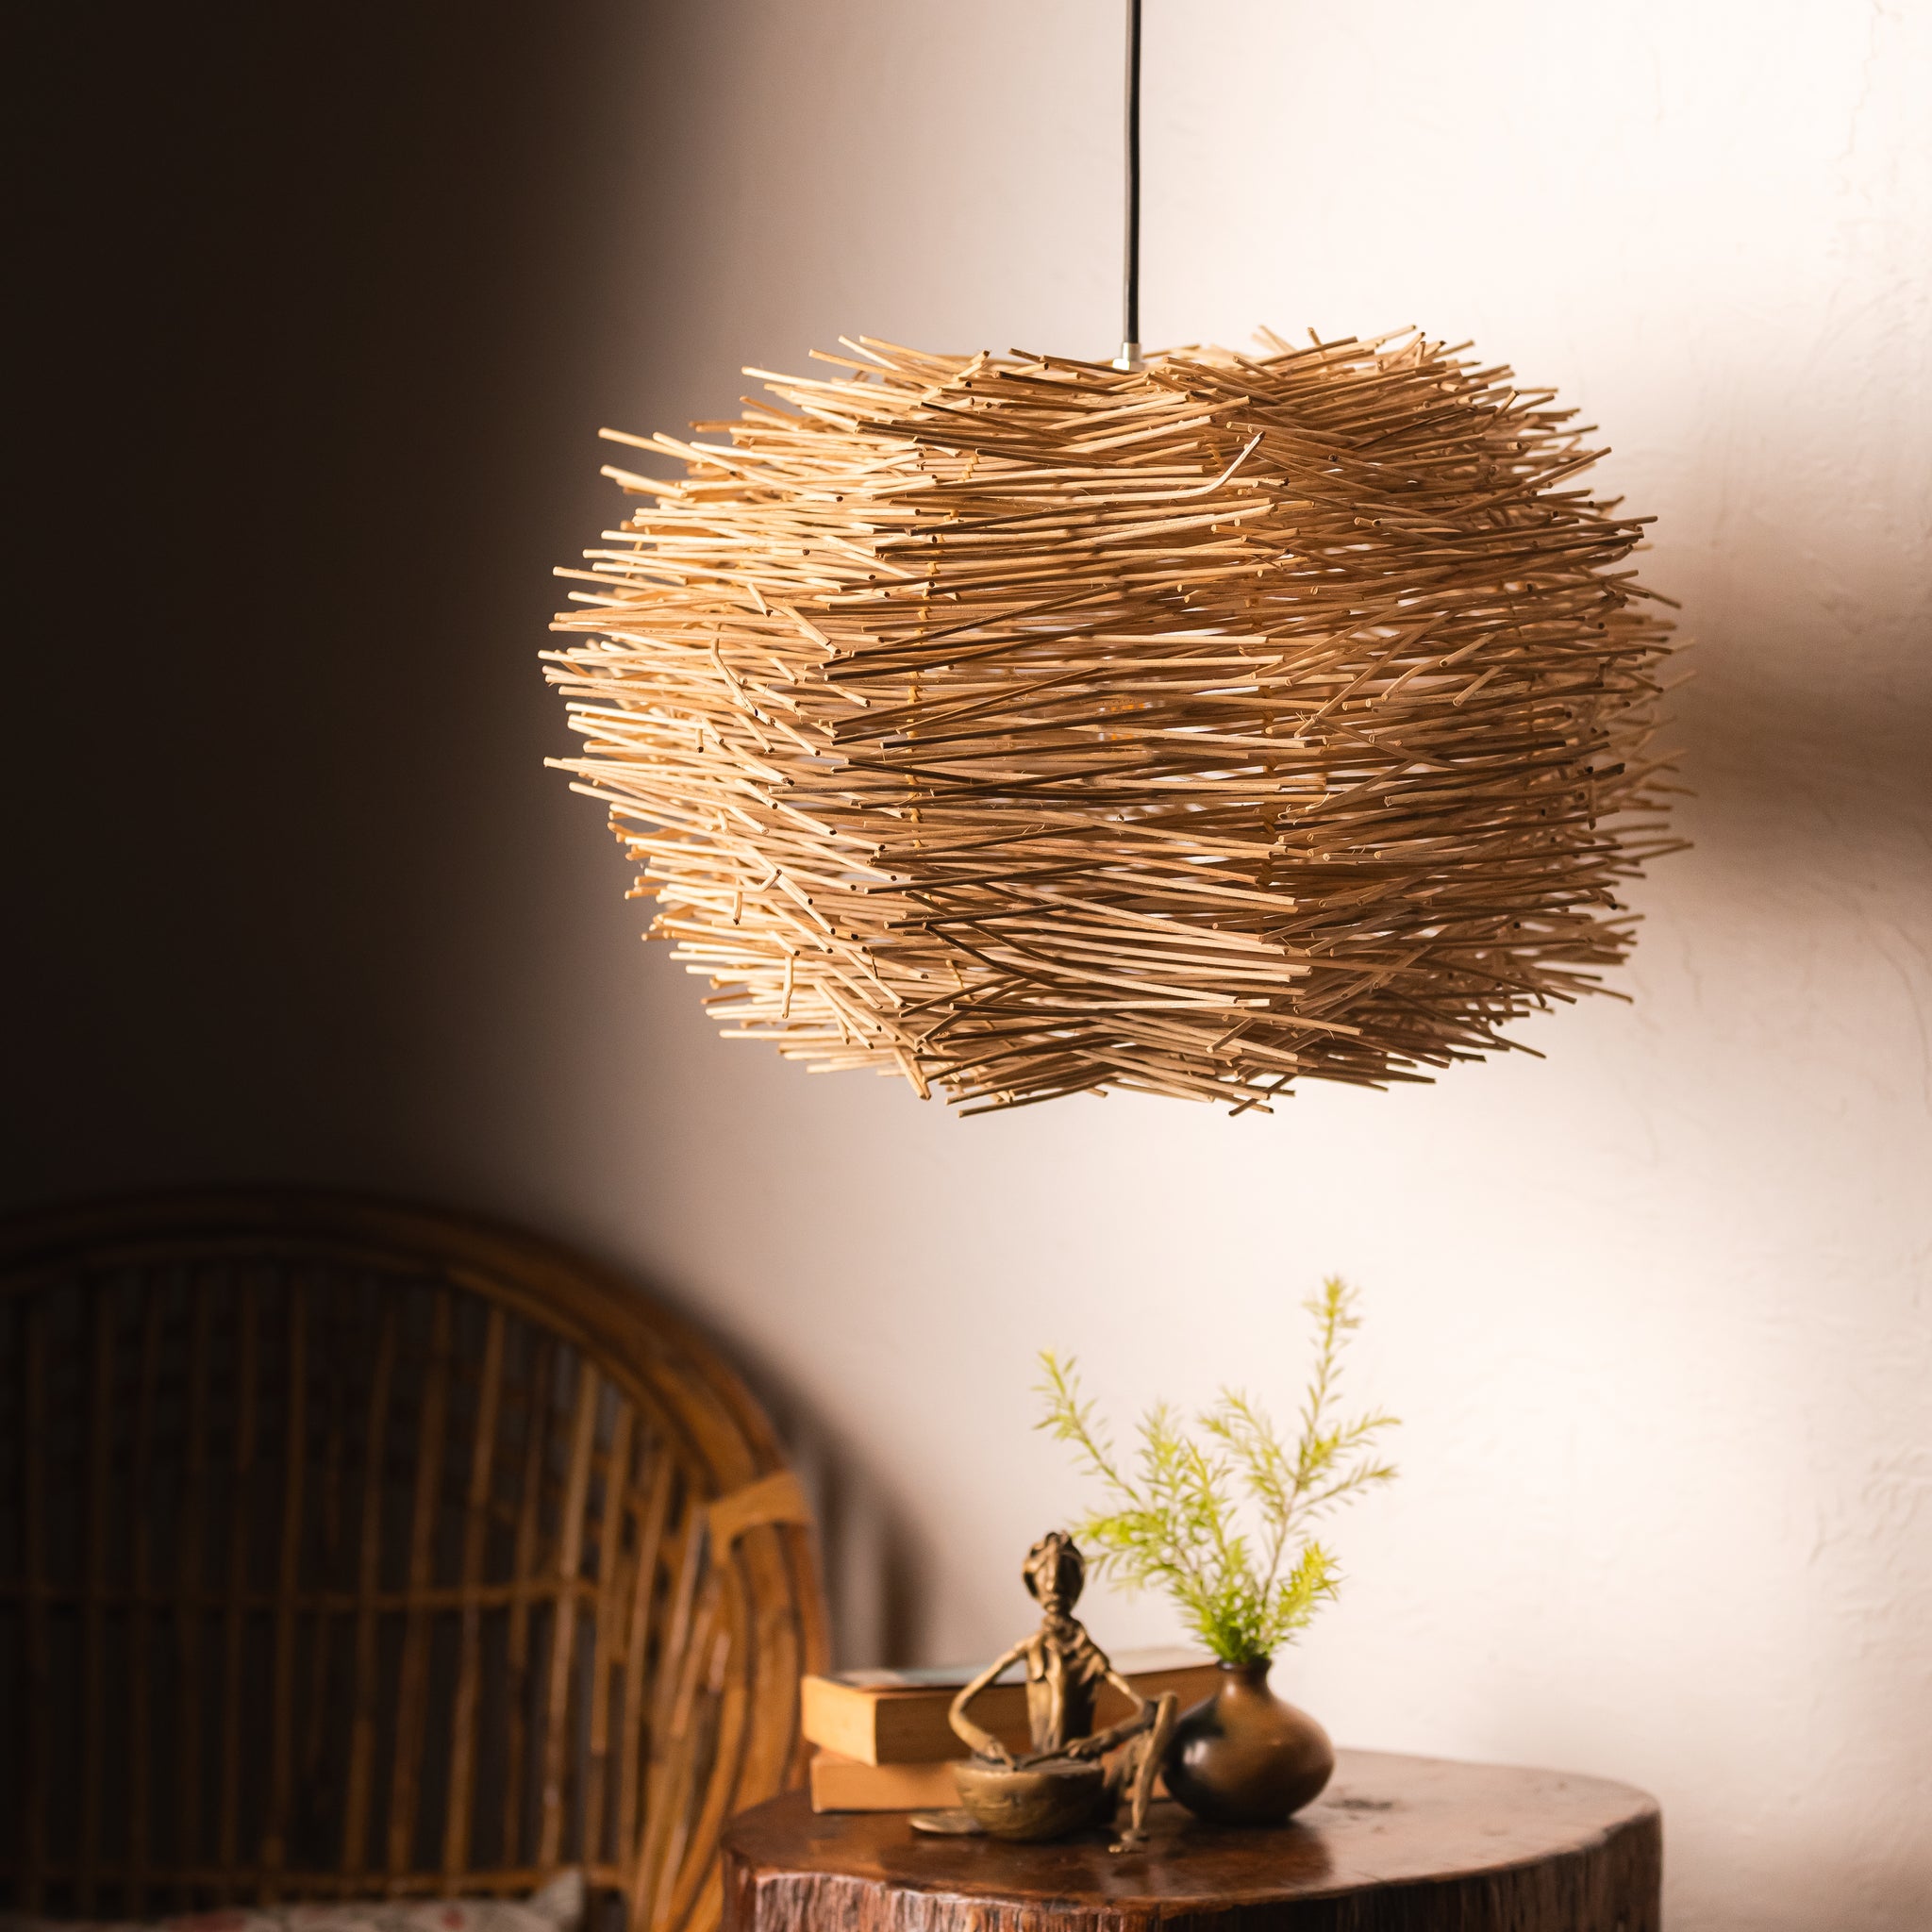 RATTAN ABSTRACT PENDANT LAMPSHADE  Abstract pendant lampshade, Artisan-made lampshade, Bedroom lighting solution, Bohemian pendant light, Child's room art, Coastal home décor, Covered patio lighting, Expertly crafted pendant, Handcrafted rattan pendant, Living space lighting, Quality rattan lighting, Rattan abstract pendant, Rustic pendant fixture, Versatile ceiling light, TESU